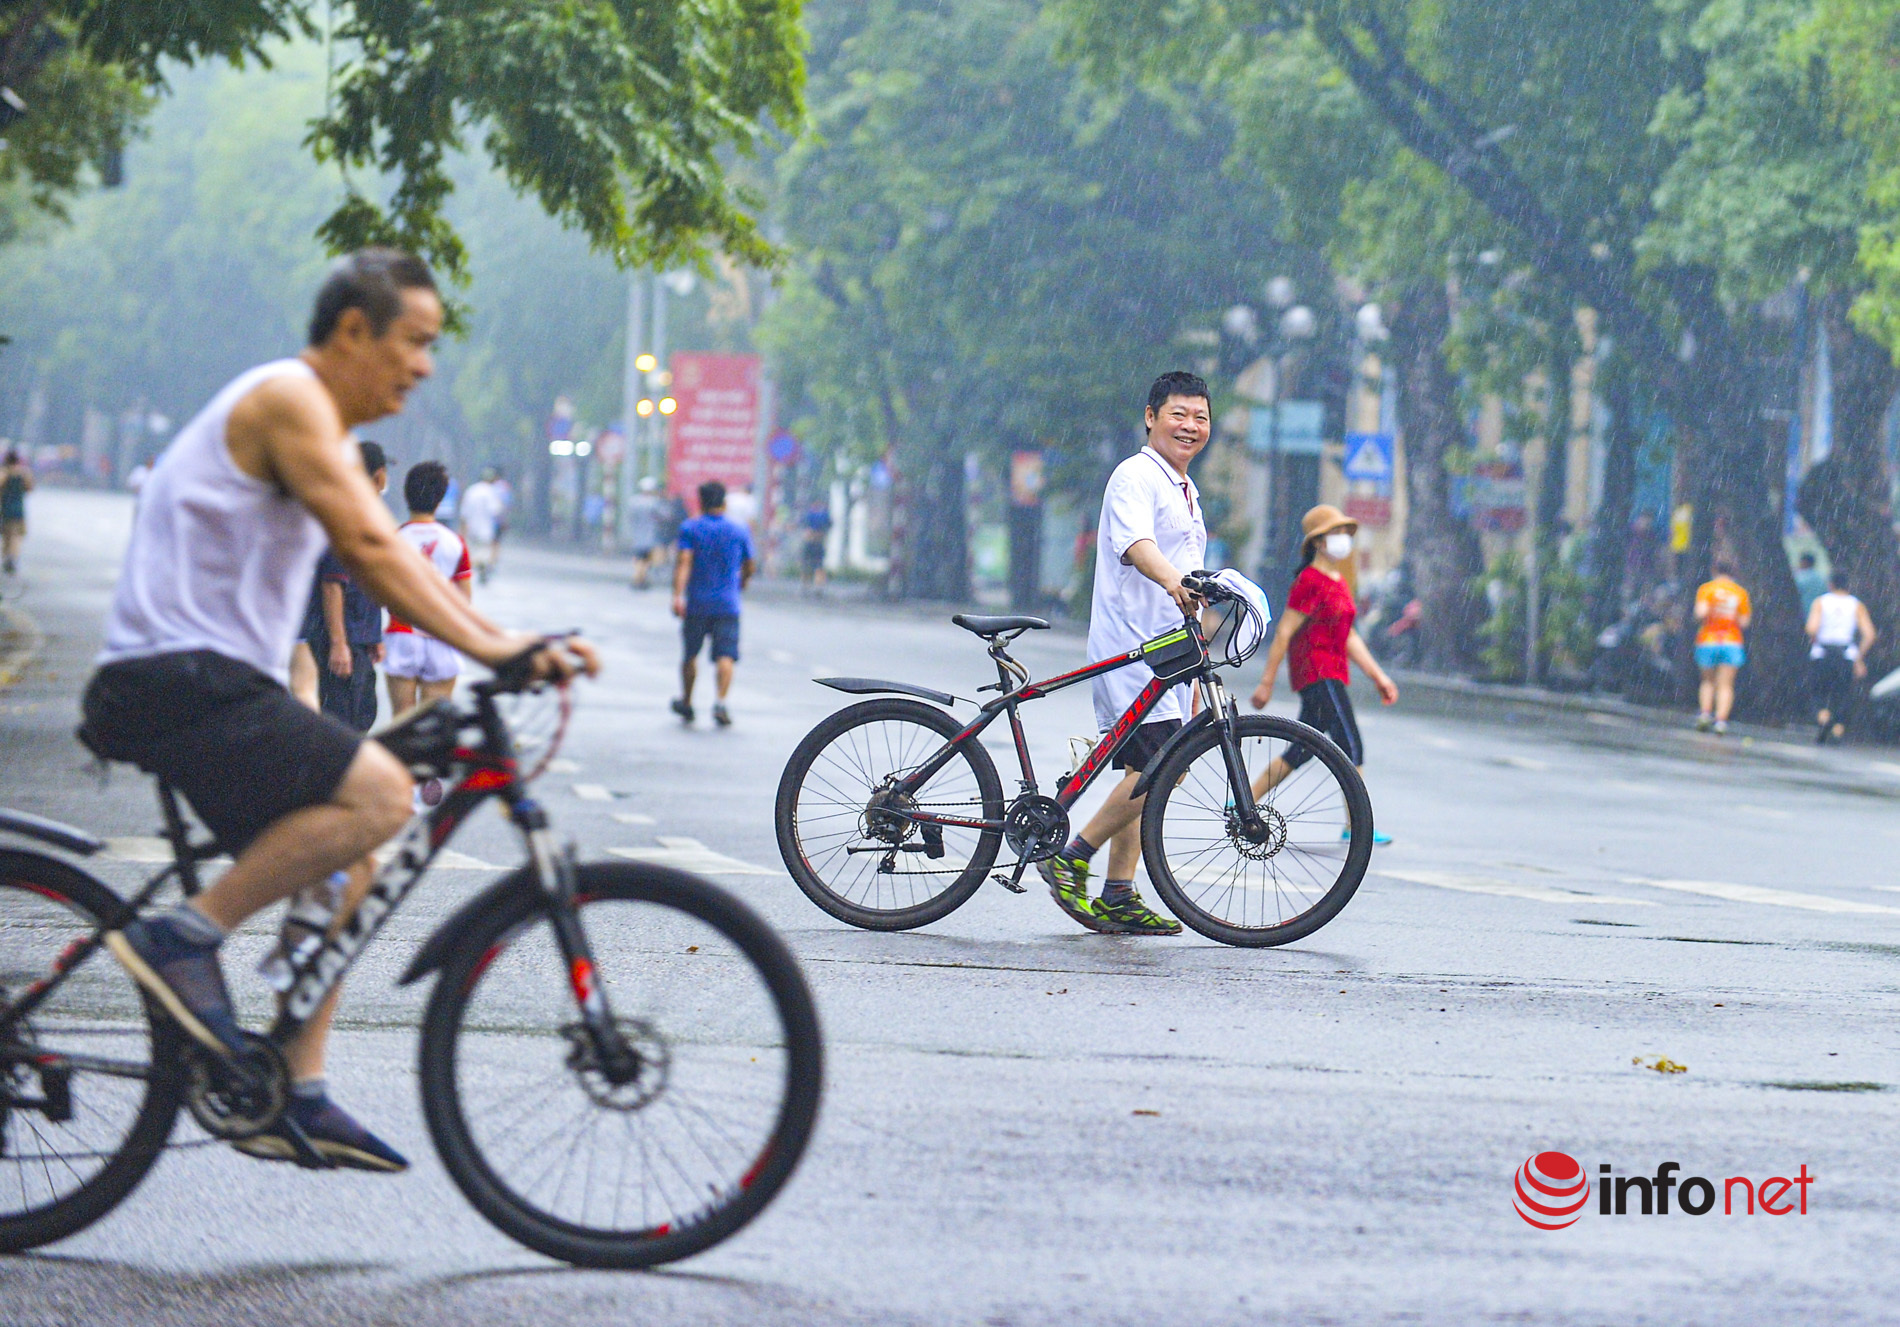 On the first day, the 'bicycle racetrack' was cleared, speakers pulled, people walked dogs into Ho Guom walking street